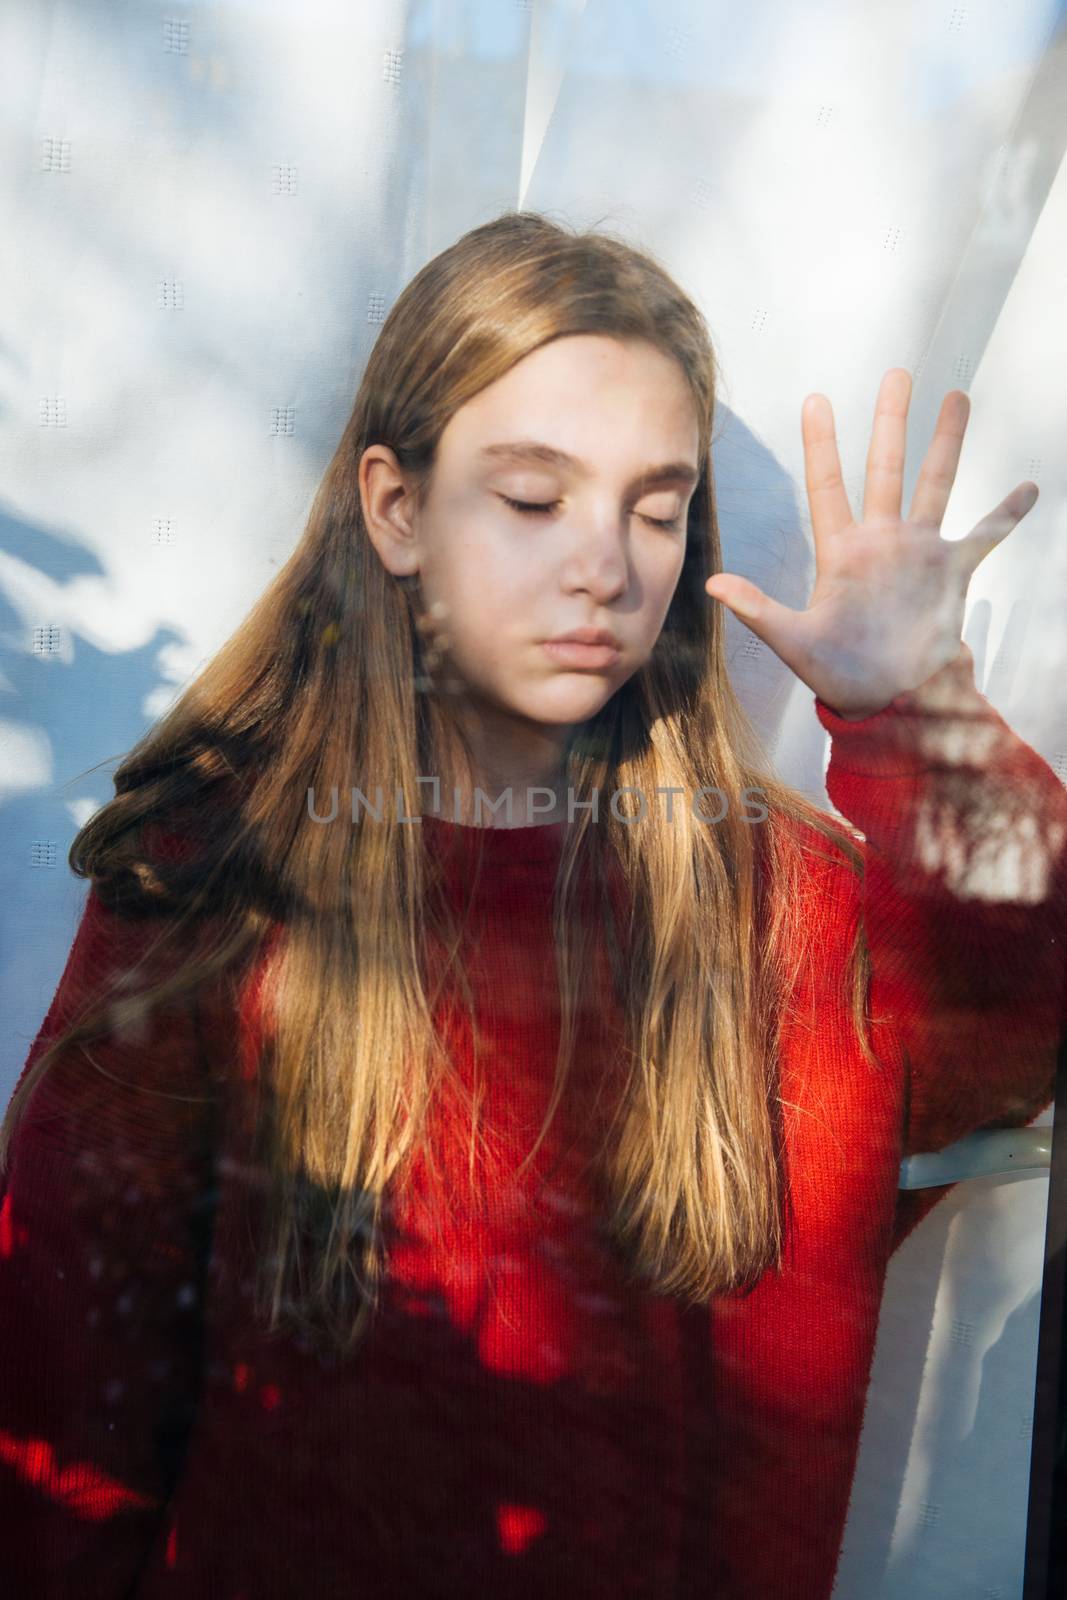 Sad cute little girl suffering depression and standing behind the window during a rainy day with raised hand 